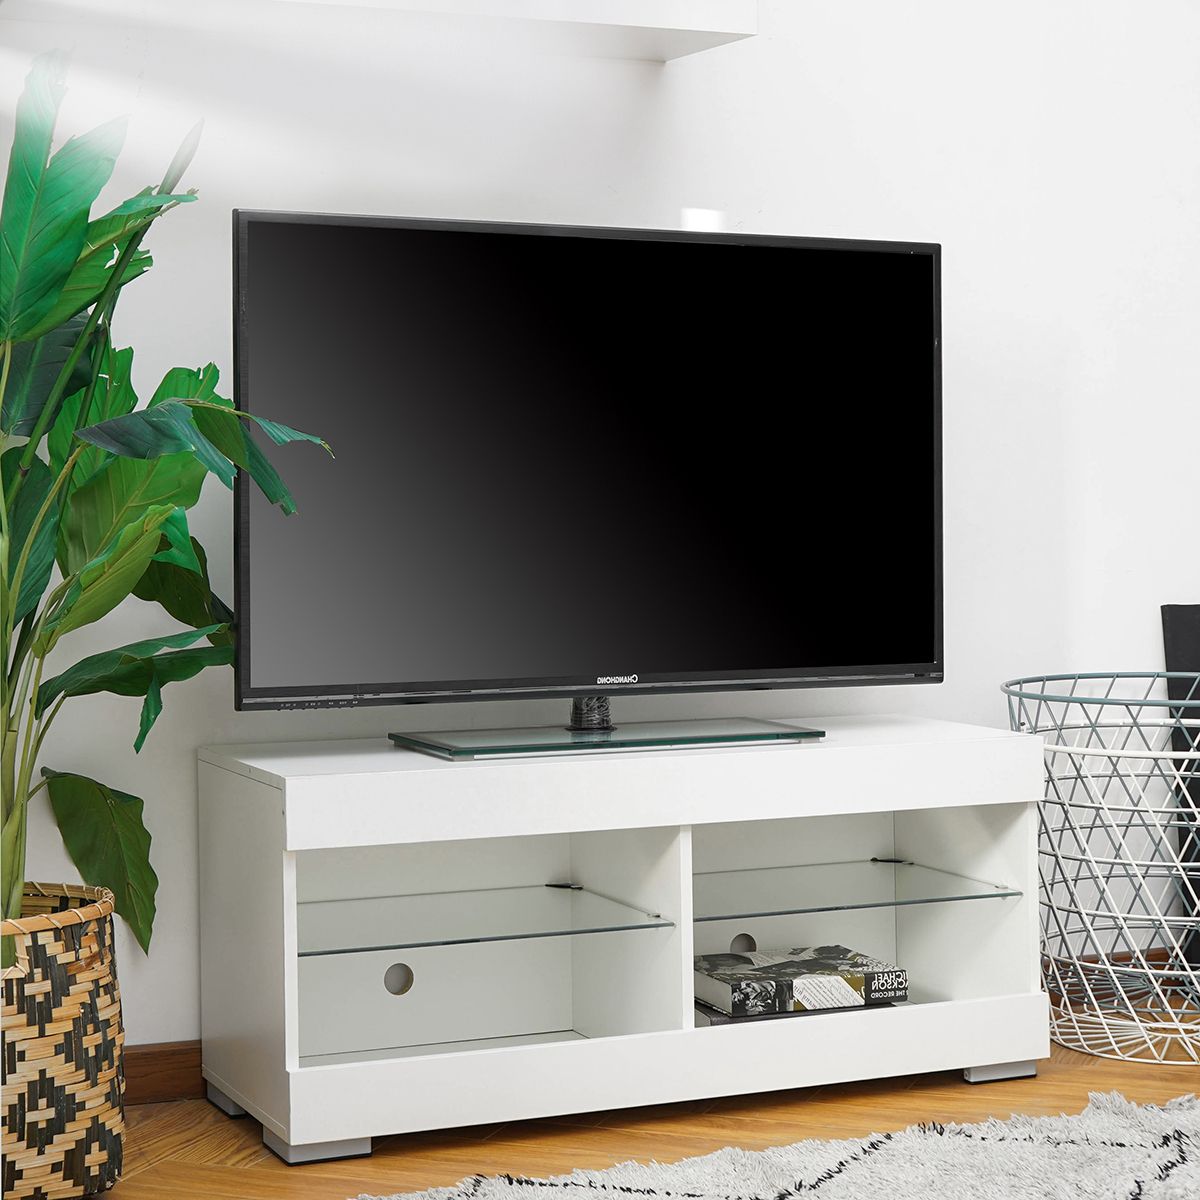 Most Popular Wood Television Stand Modern Tv Stand Cabinet With Led Inside Glass Shelves Tv Stands (Photo 2 of 10)